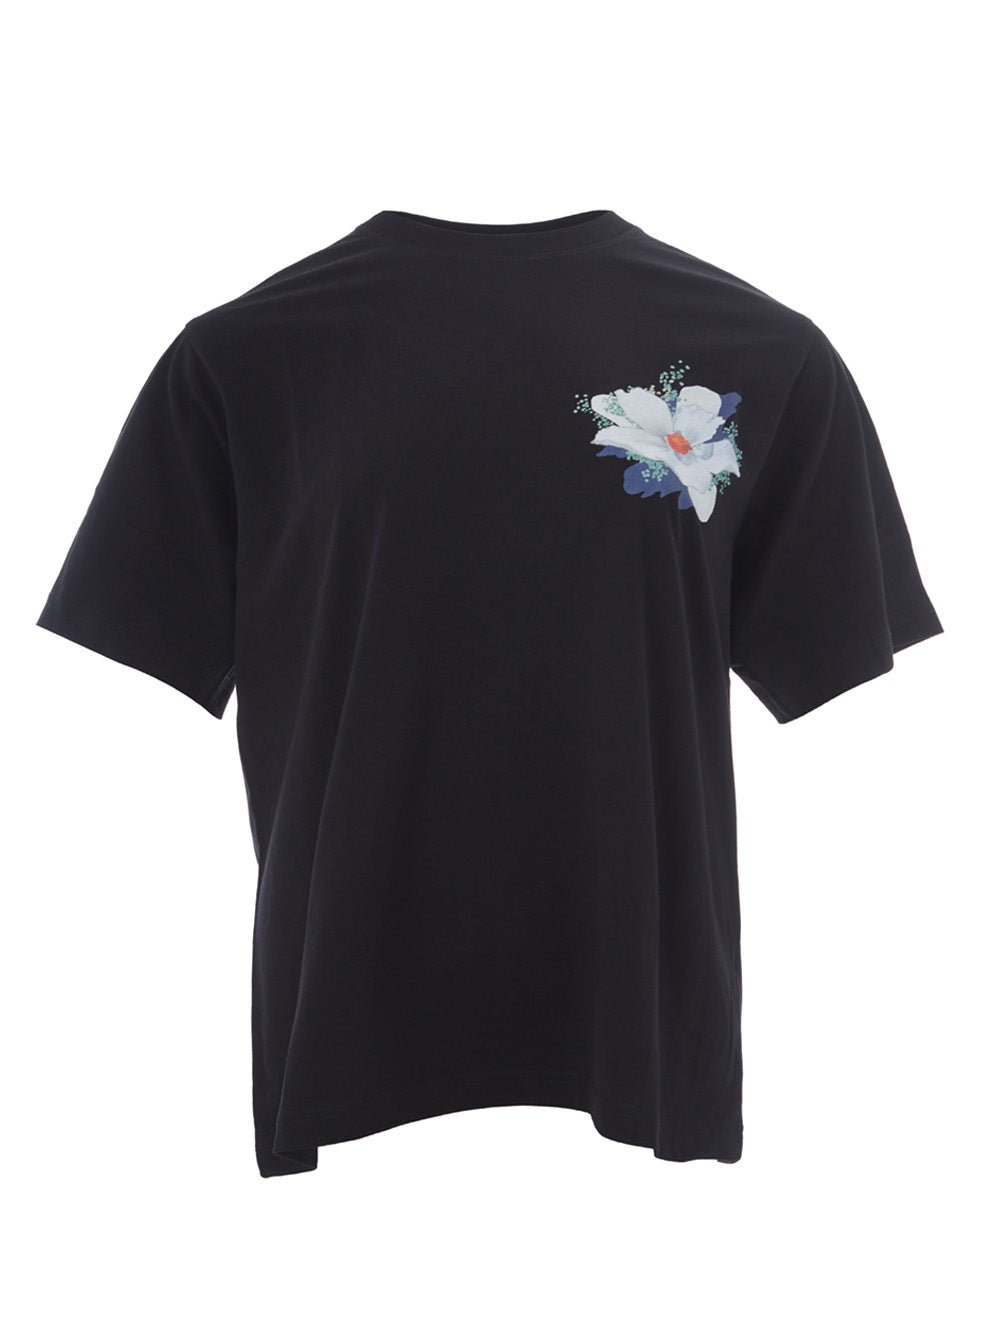 Kenzo Black Printed Cotton T-Shirt With Flower